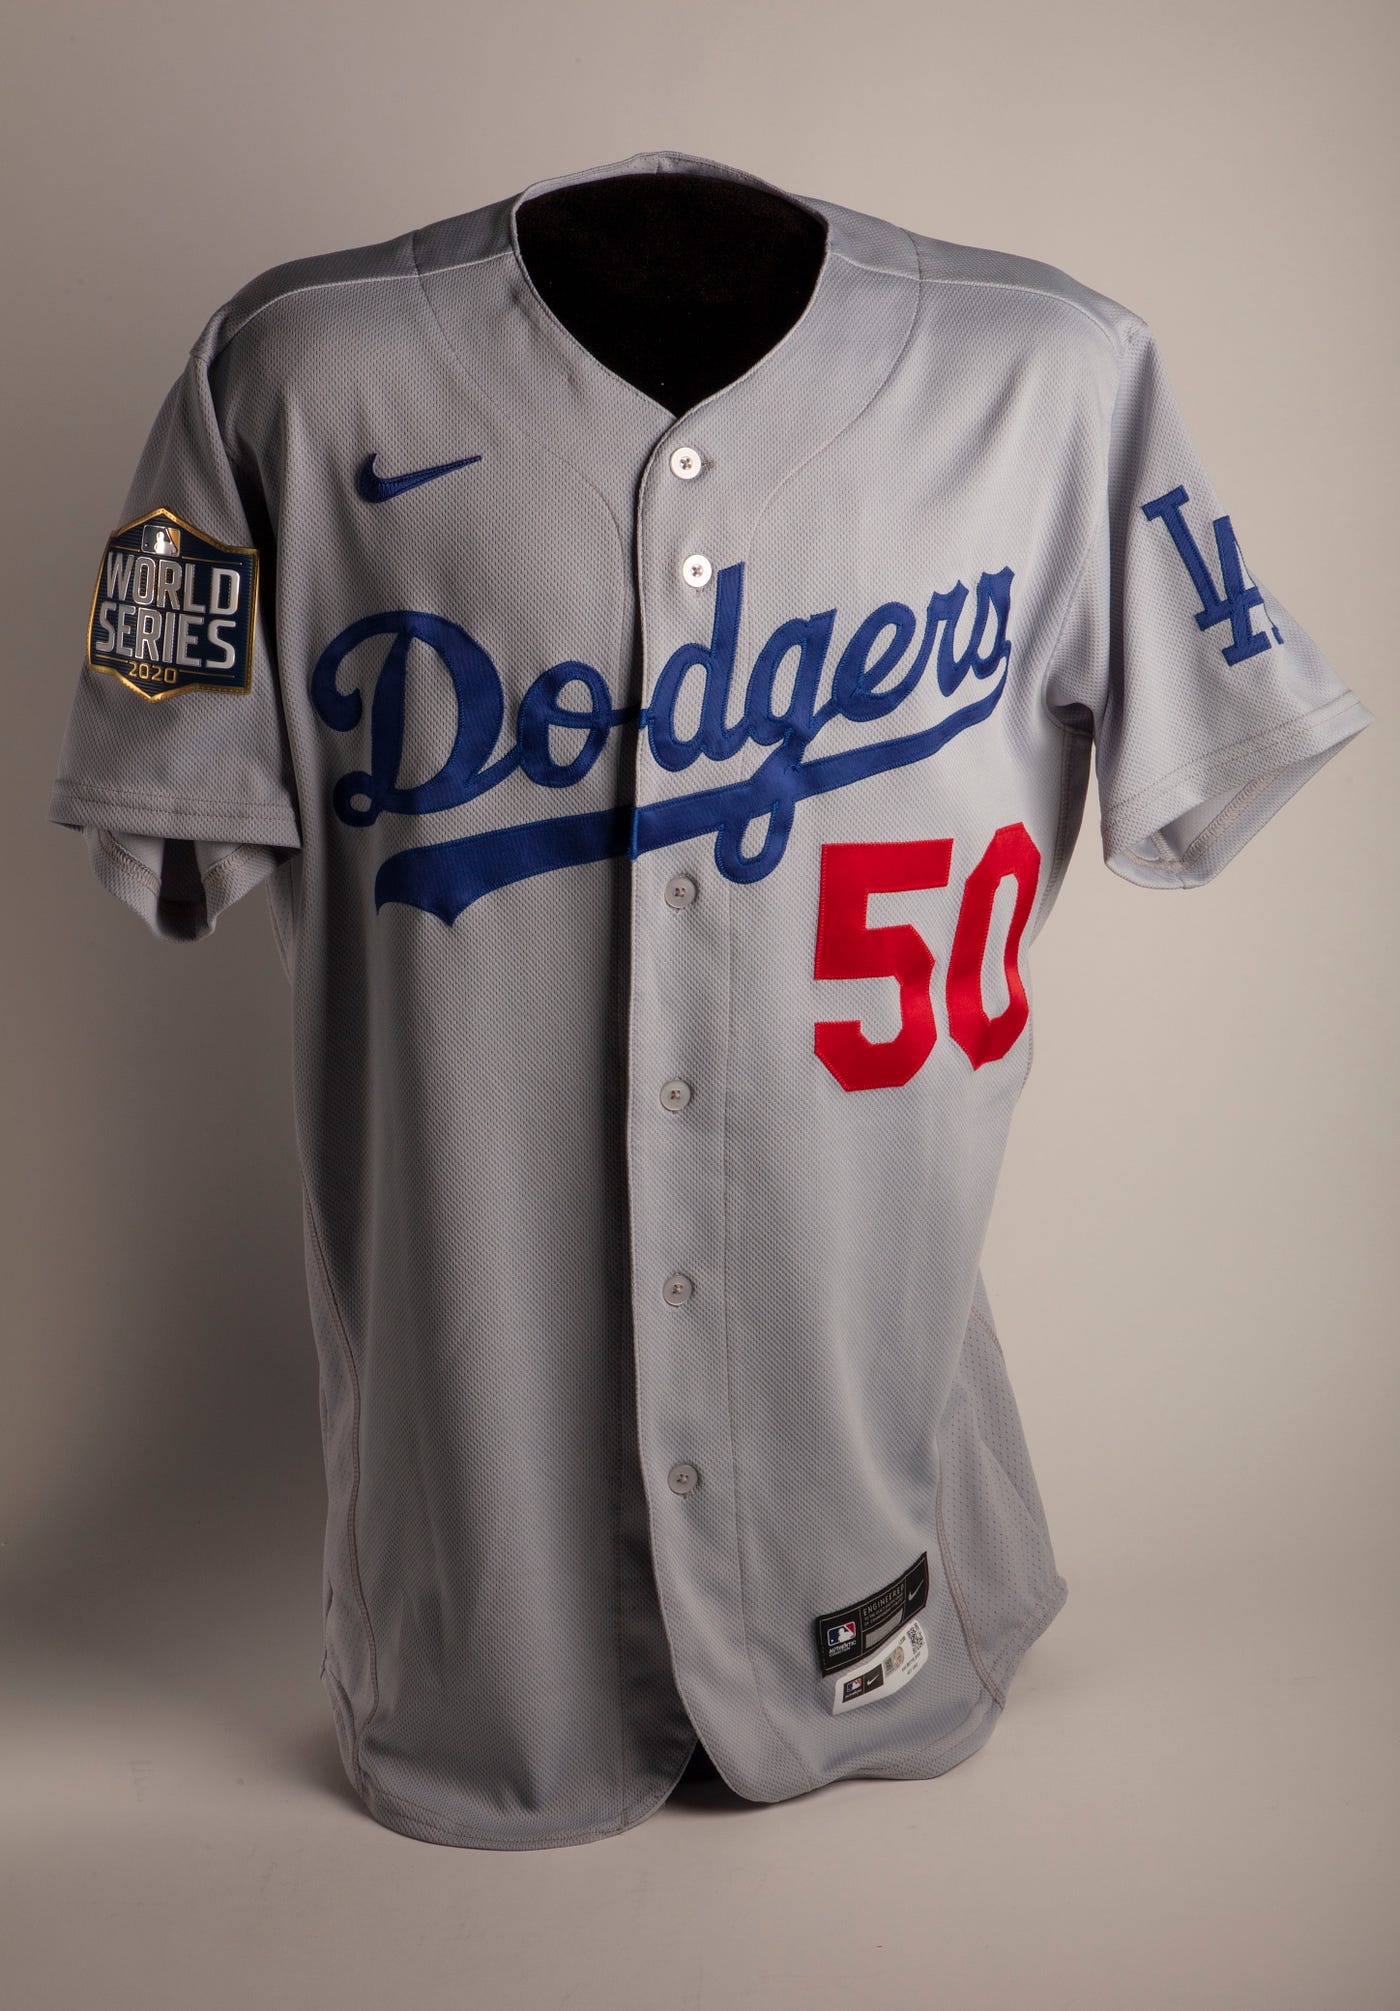 World champion Dodgers honored with exhibit at Hall of Fame, by Rowan  Kavner